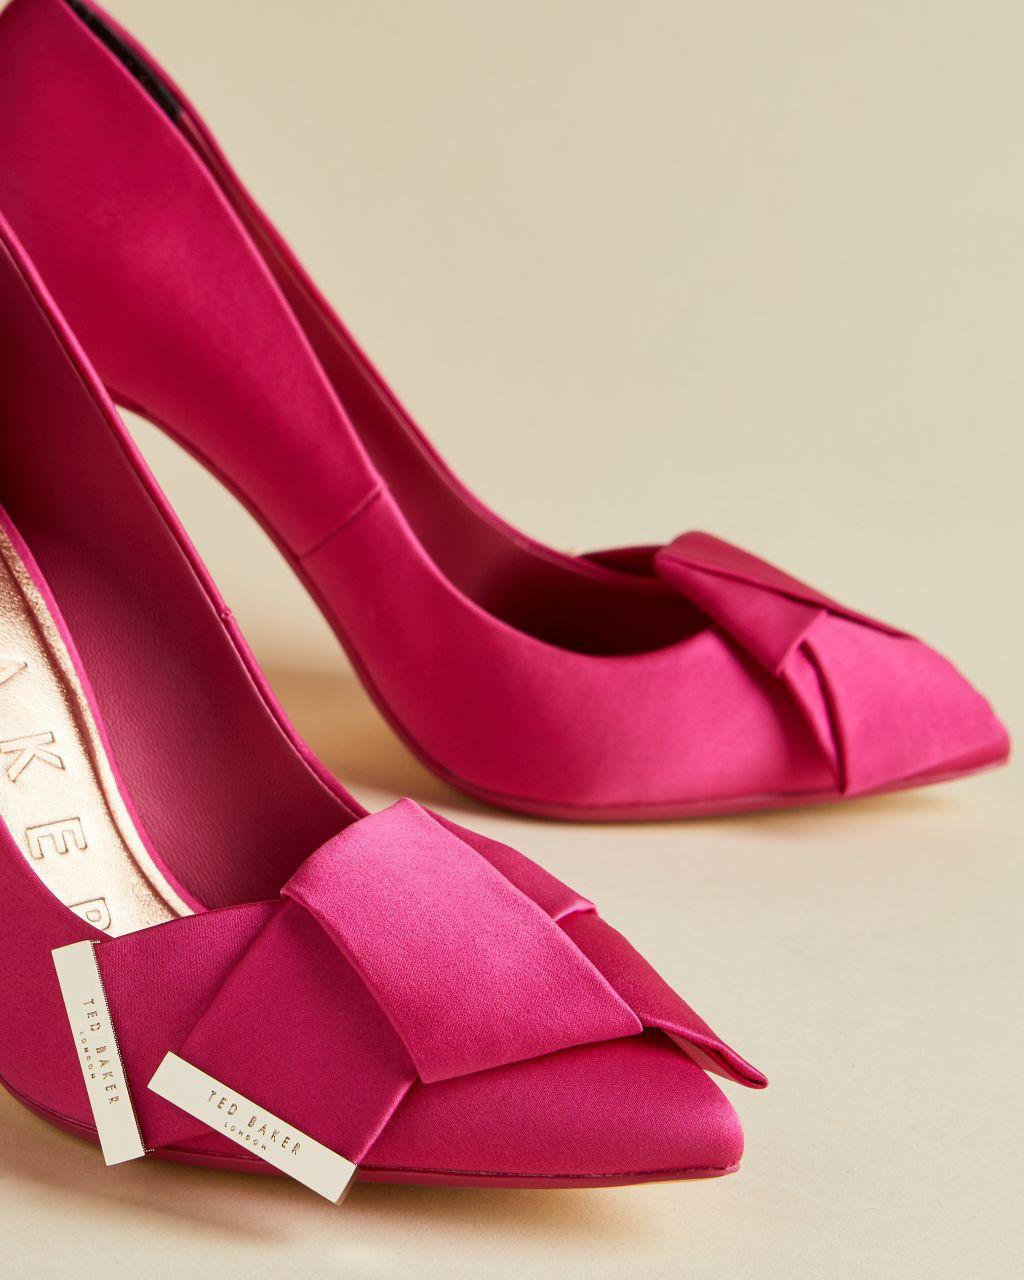 Ted Baker Satin Bow Detail Courts in Bright Pink (Pink) - Lyst